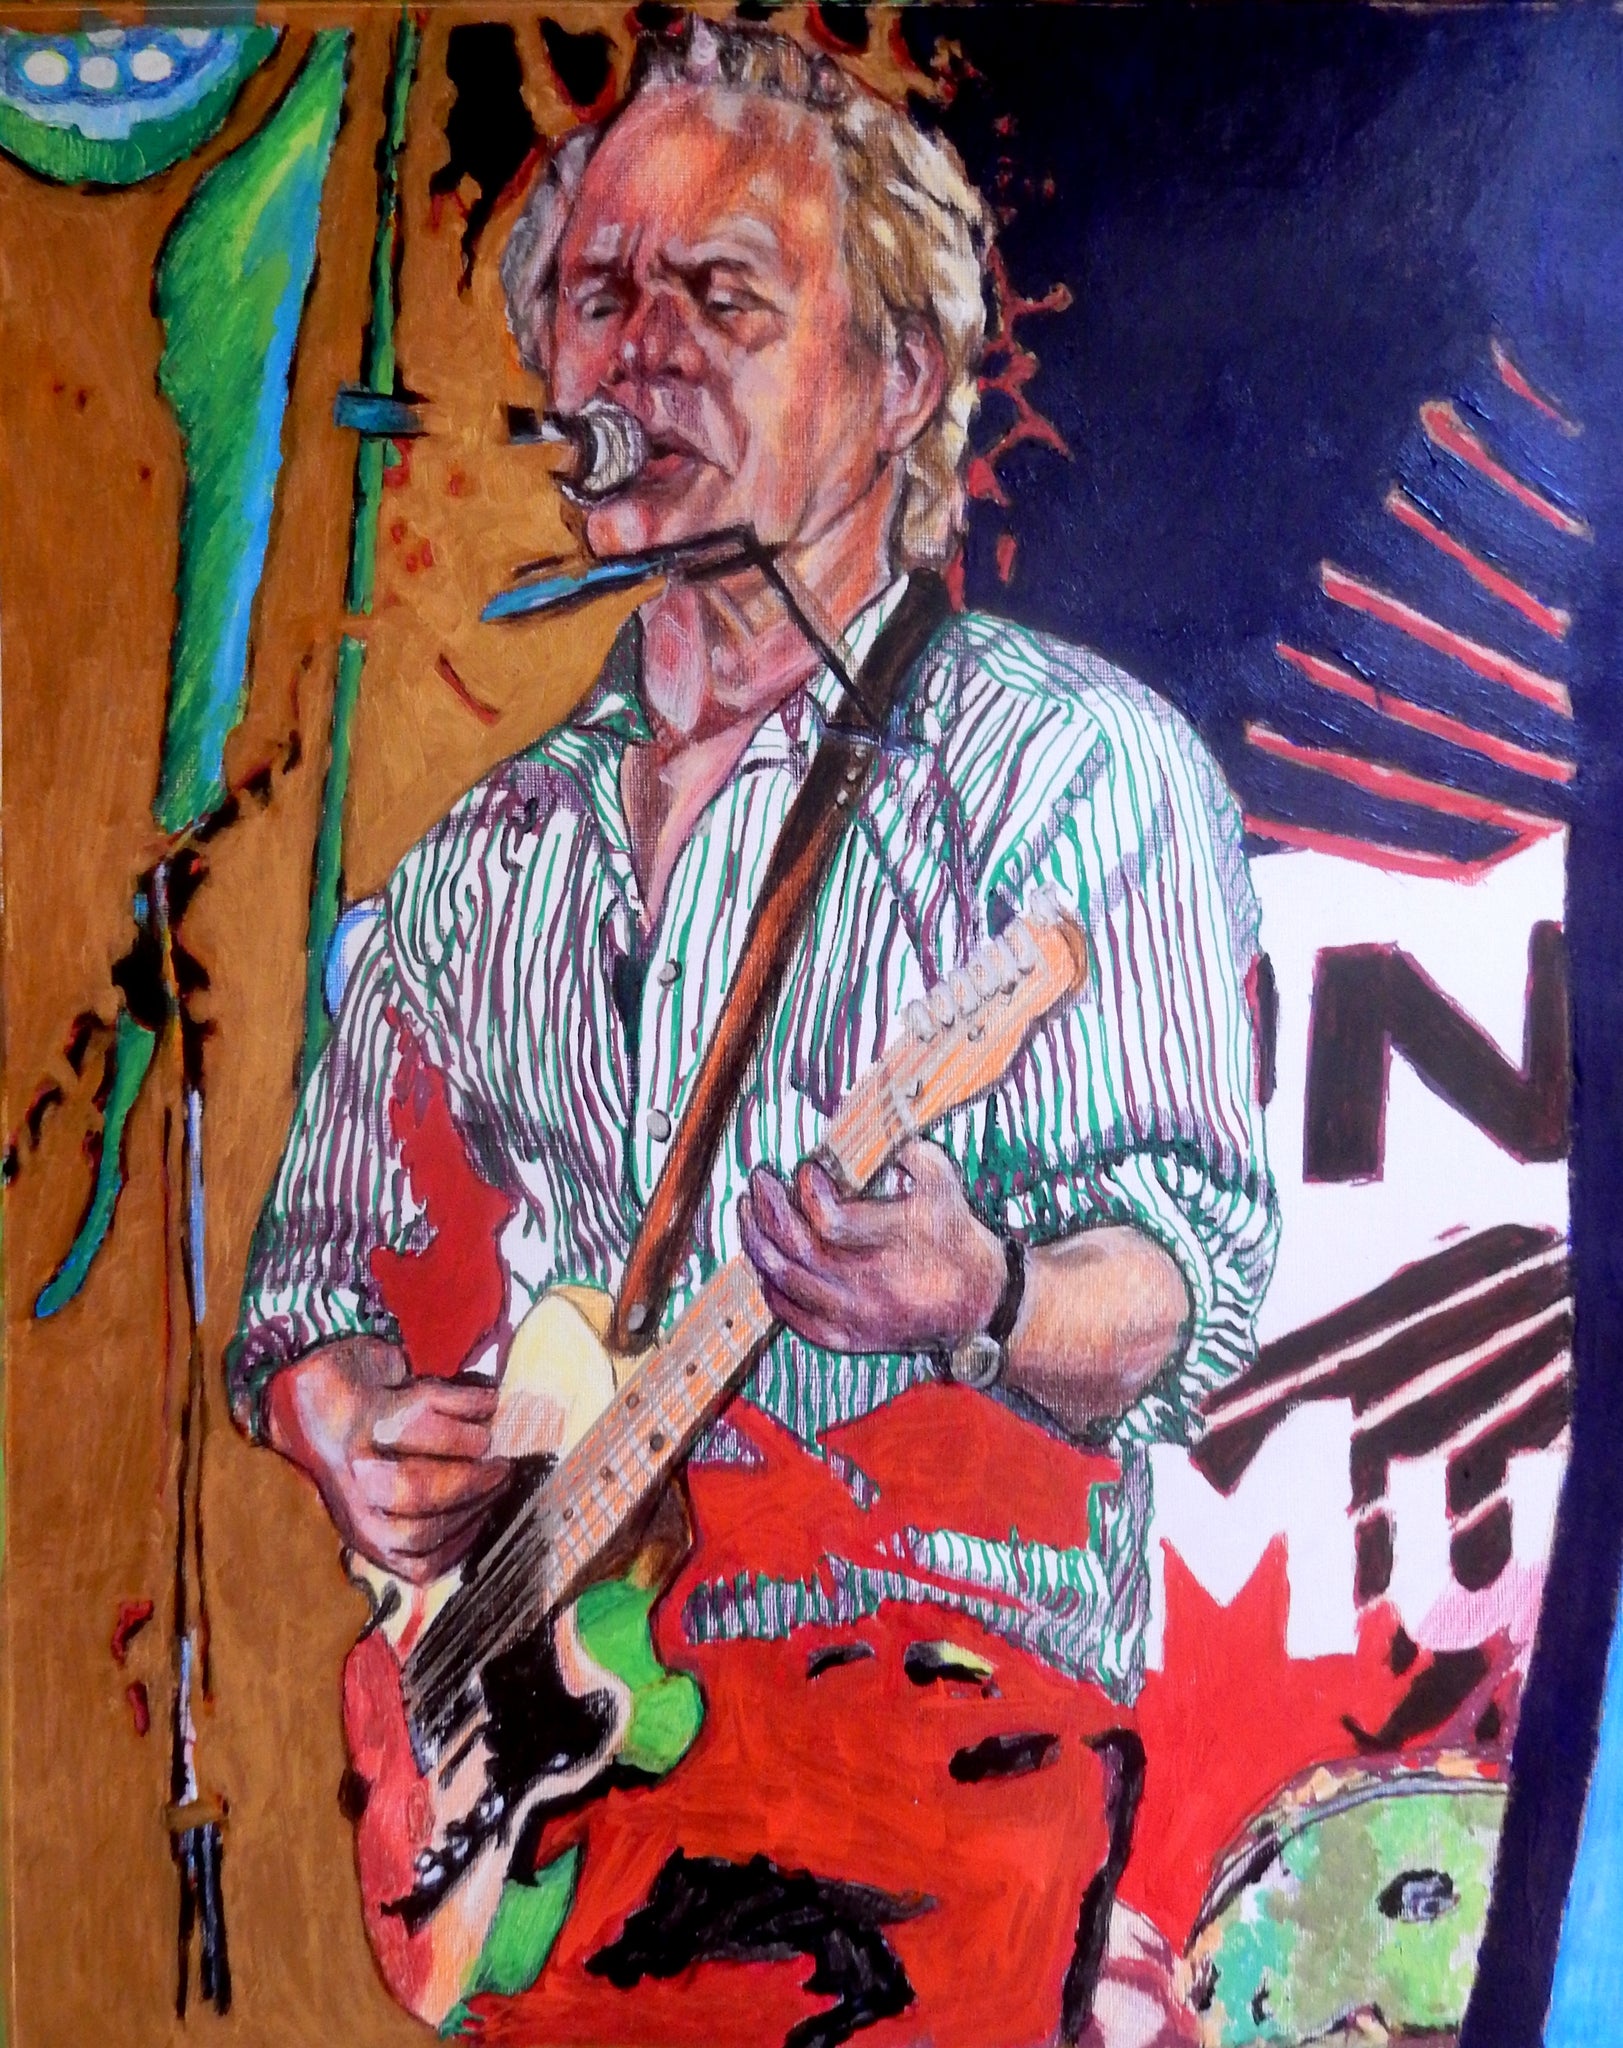 Chris Jagger at The Brentham Club by Stella Tooth musician artist